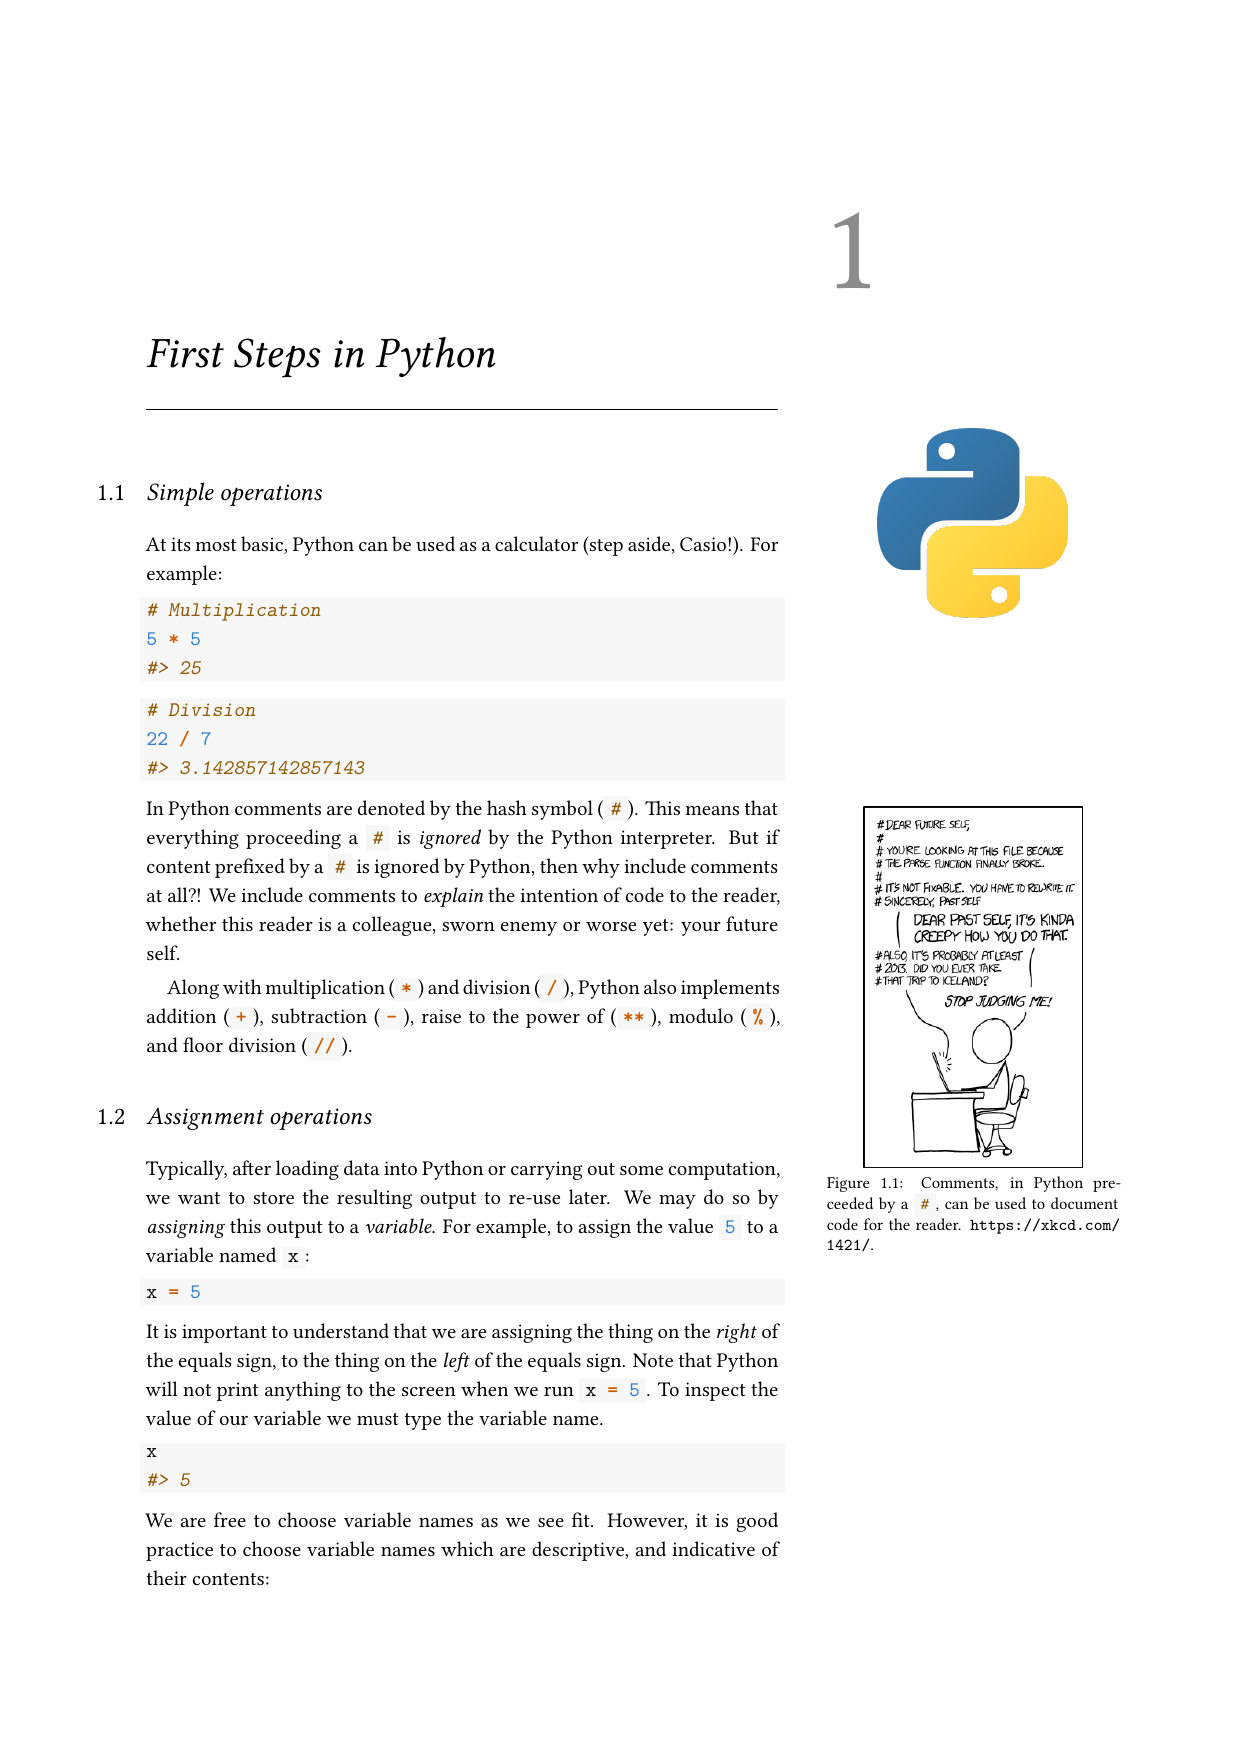 Example course material for 'Introduction to Python'